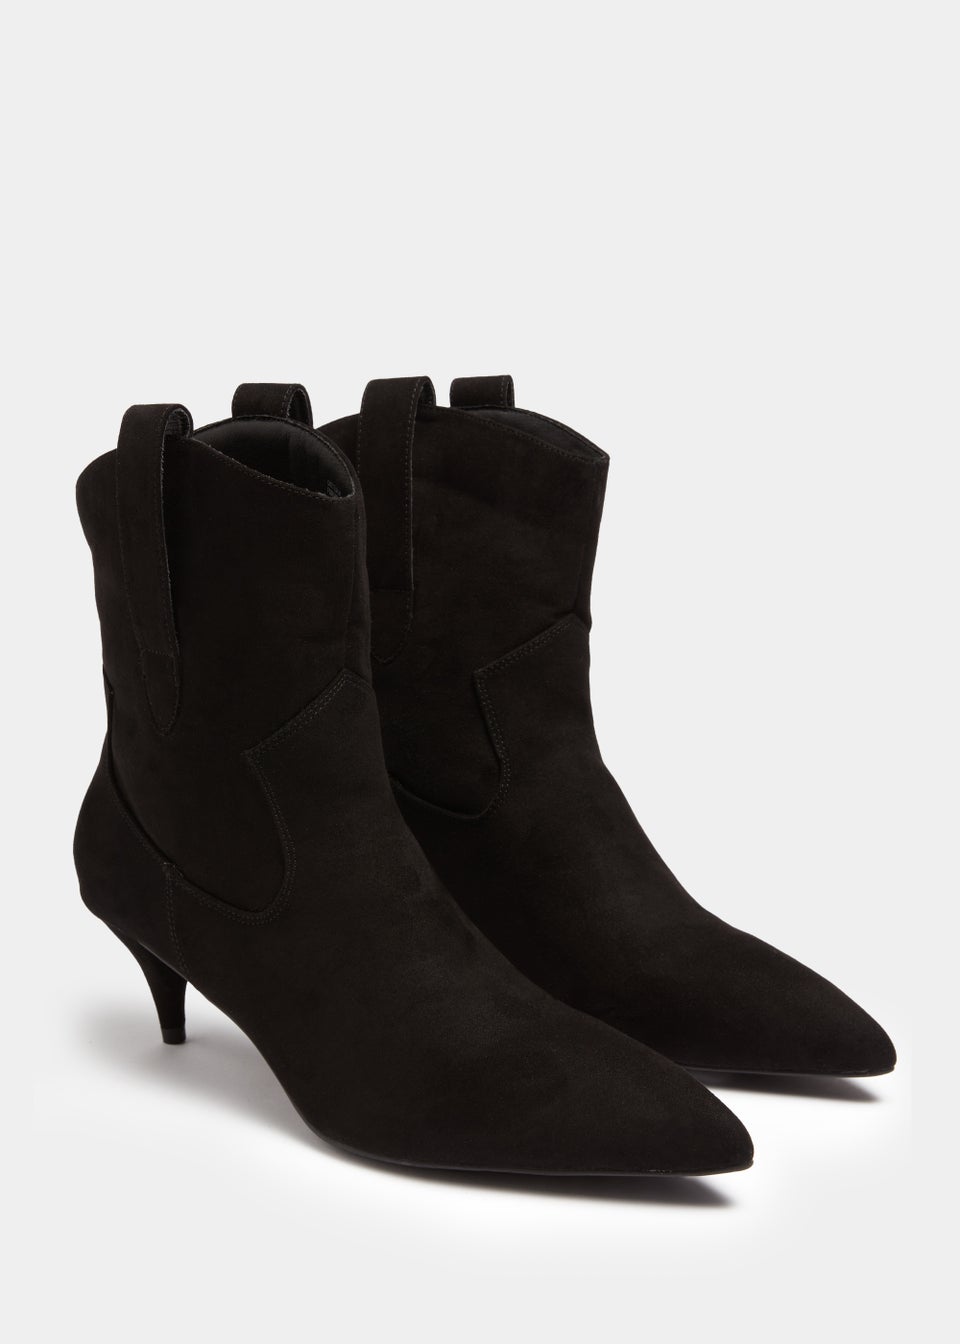 Et Vous Black Western Pointed Toe Boots - Matalan